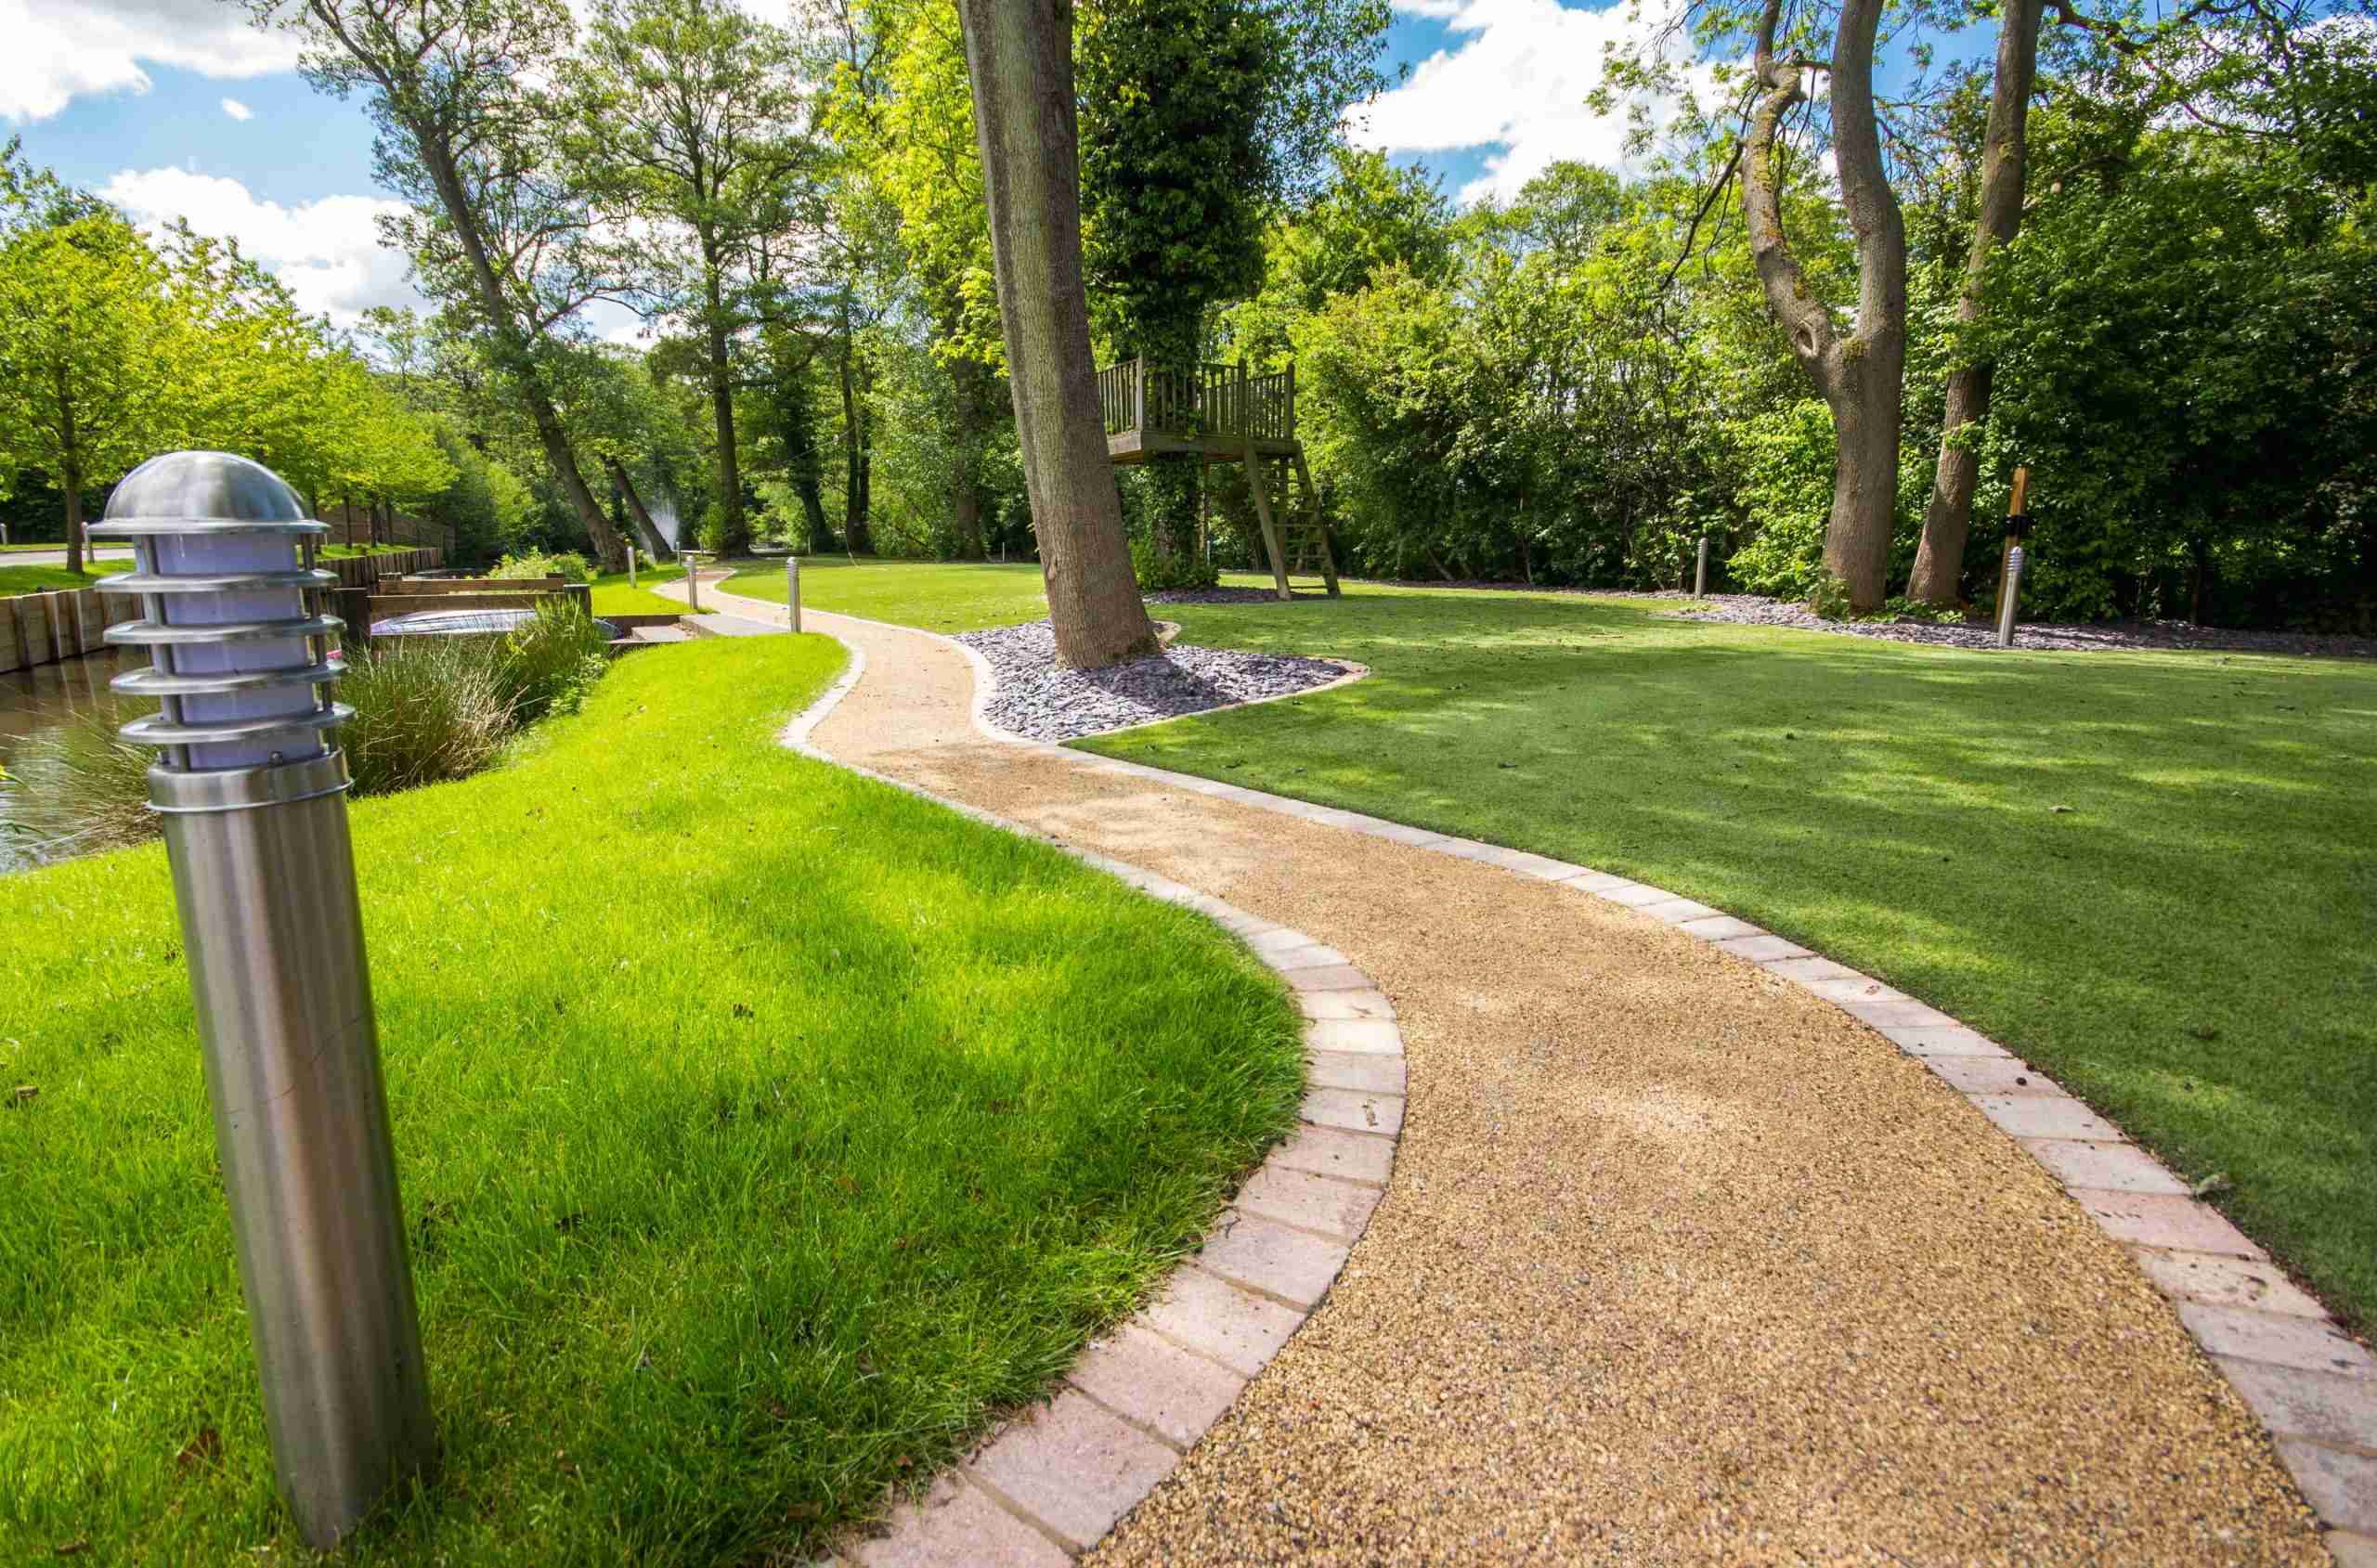 Providers Of Resin Bonded Surfaces For Hard Landscaping Midlands